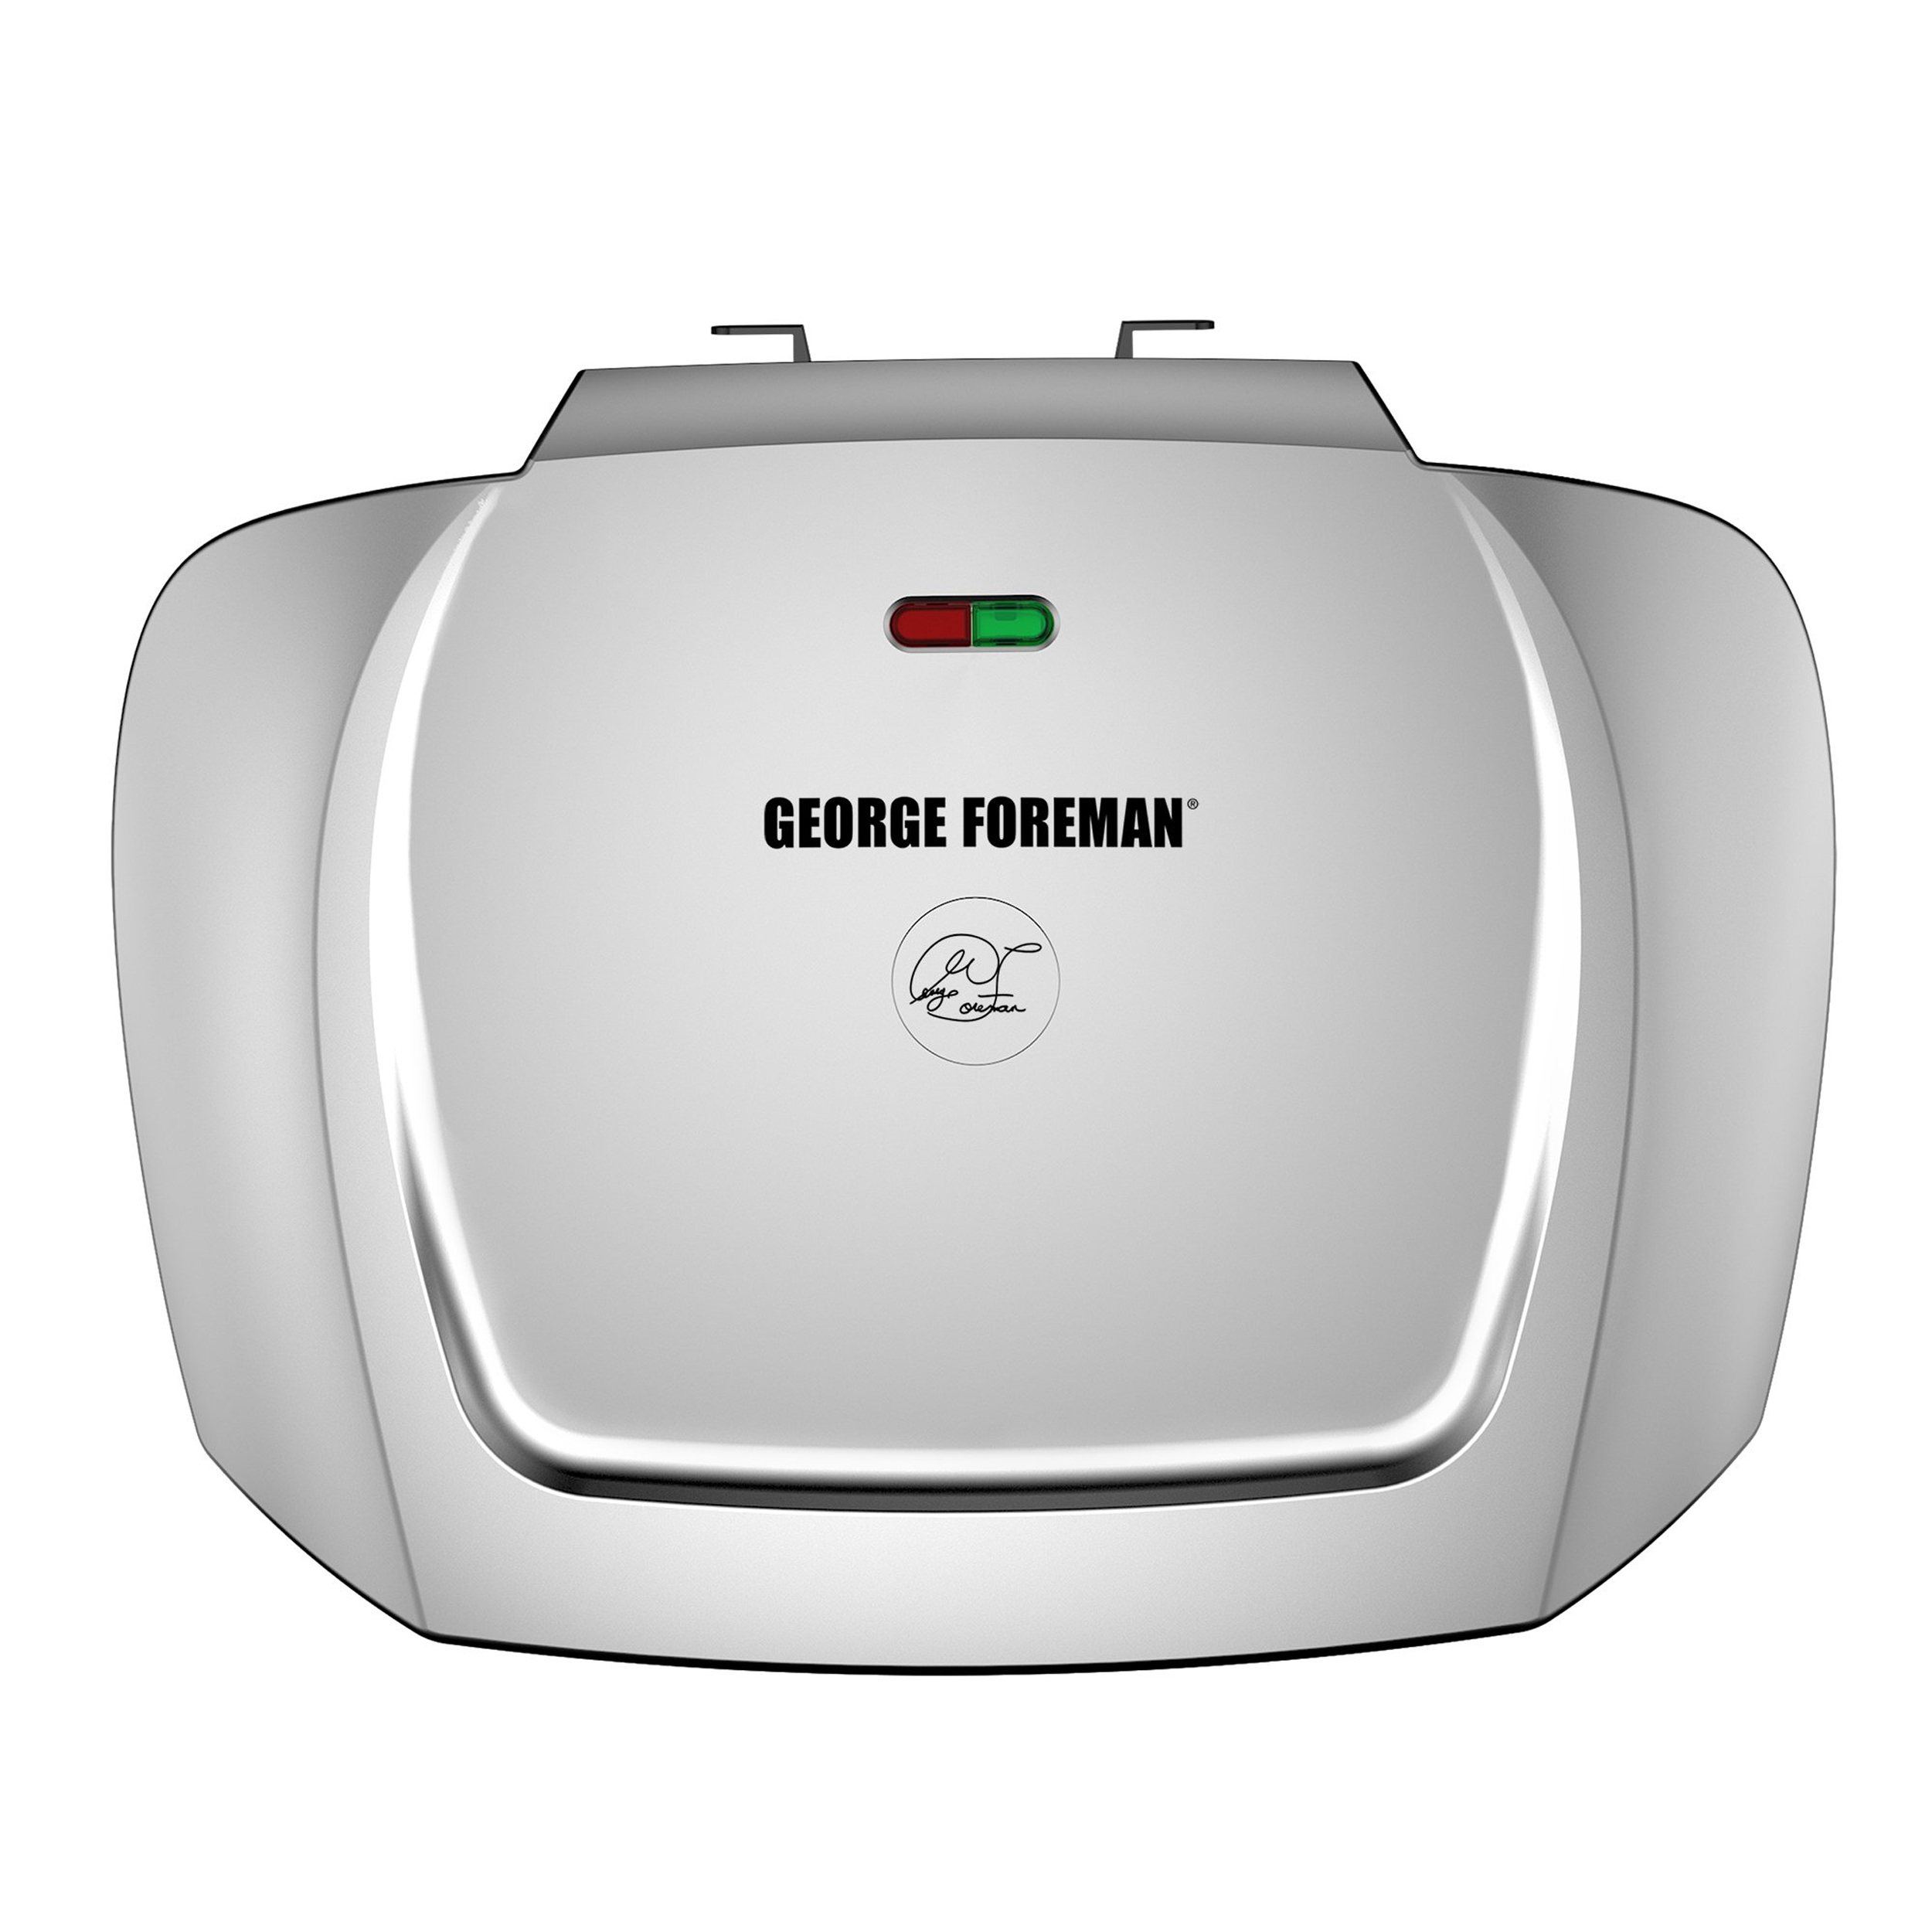 George Foreman 9-Serving Classic Plate Electric Indoor Grill and Panini Press, Platinum, GR2144P - image 3 of 11